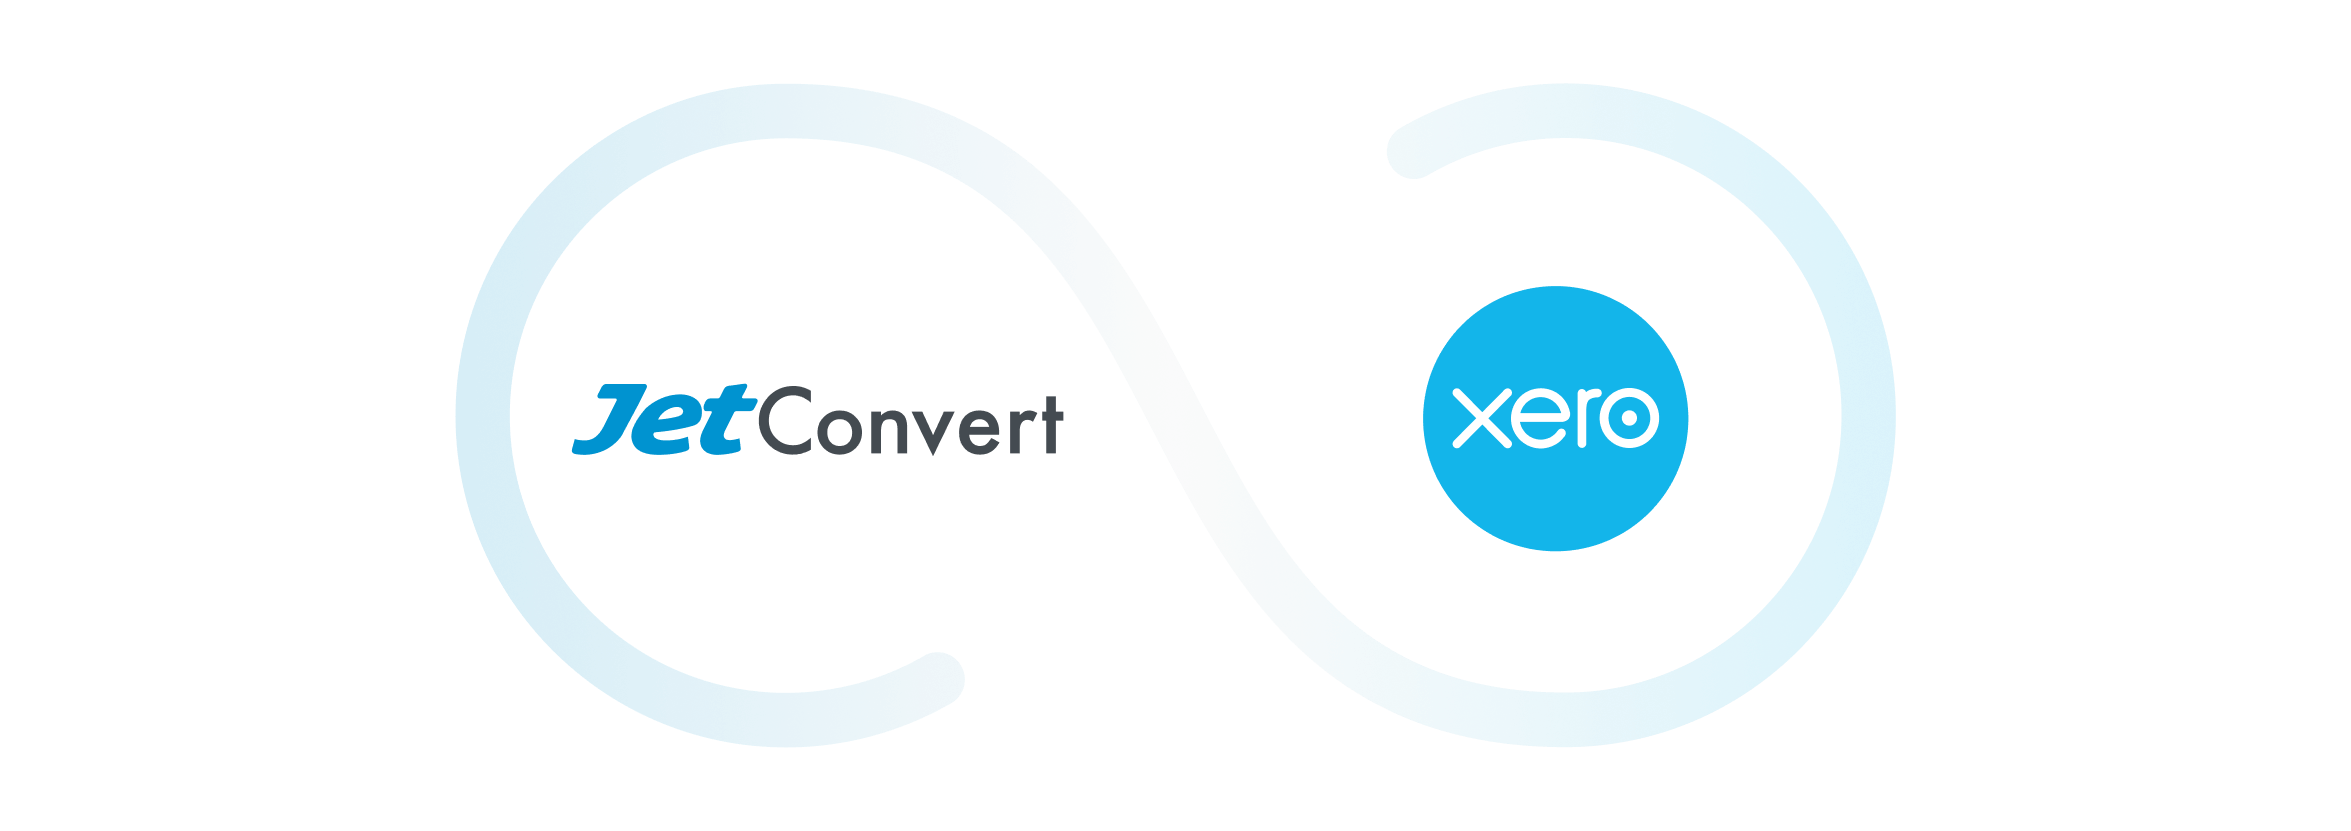 JetConvert and Xero logos side by side, a blue ribbon running around and between them.